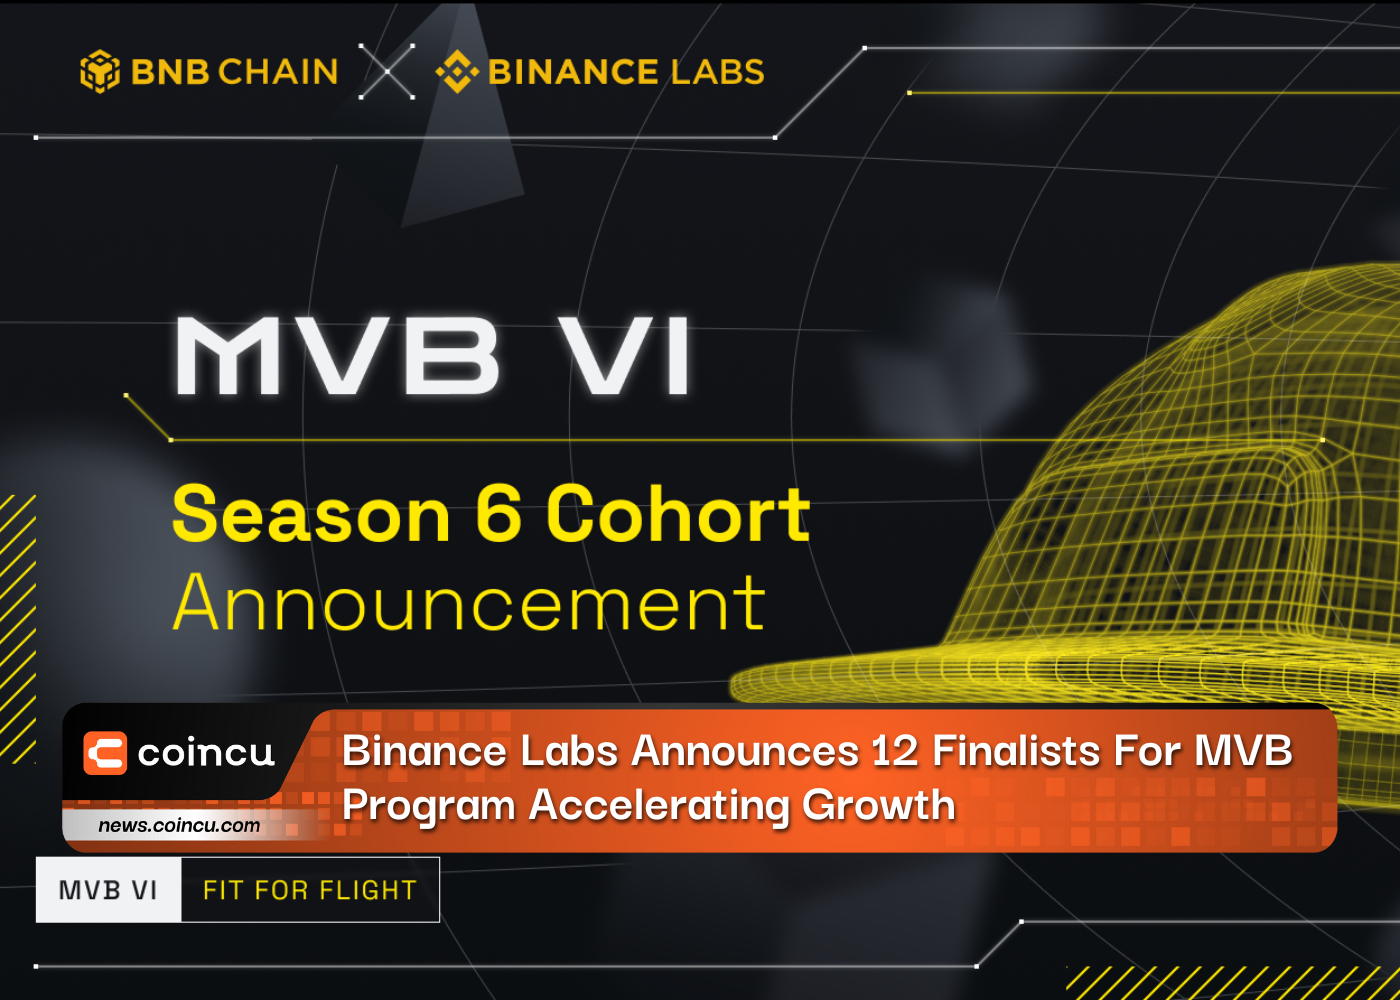 Binance Labs Announces 12 Finalists For MVB Program Accelerating Growth